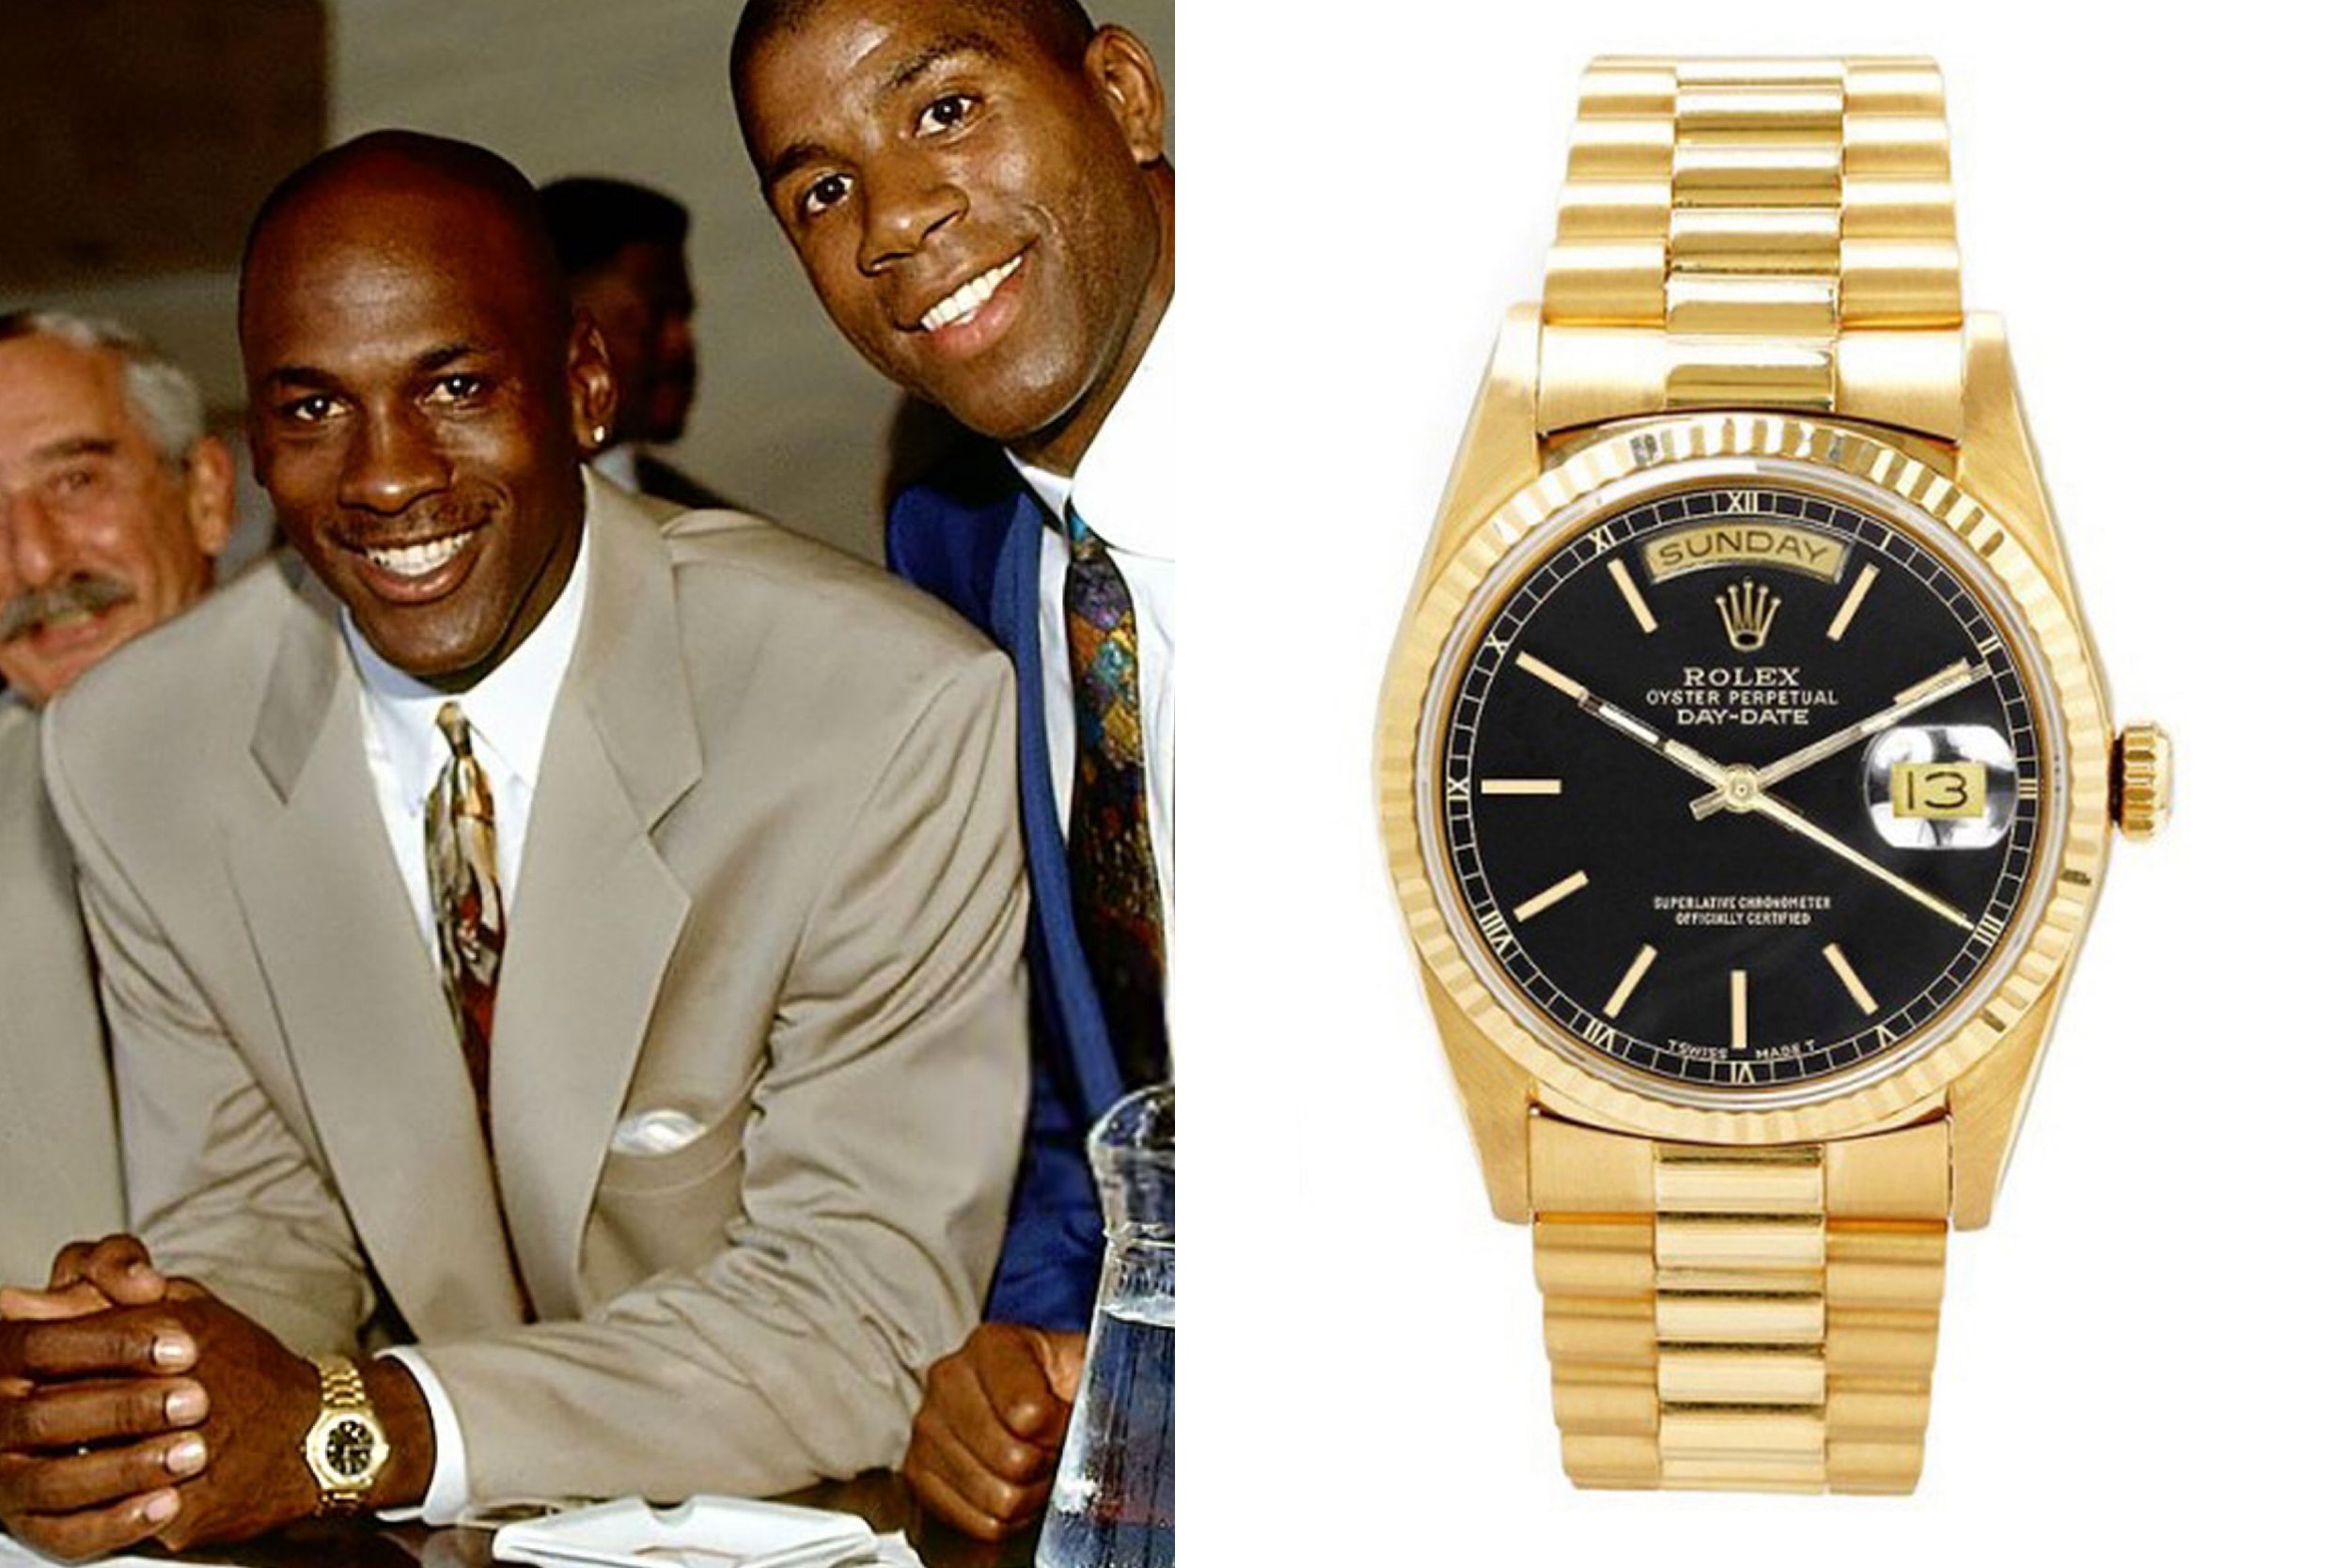 LeBron James - Rolex Oyster Perpetual Day-Date featuring an ice-b